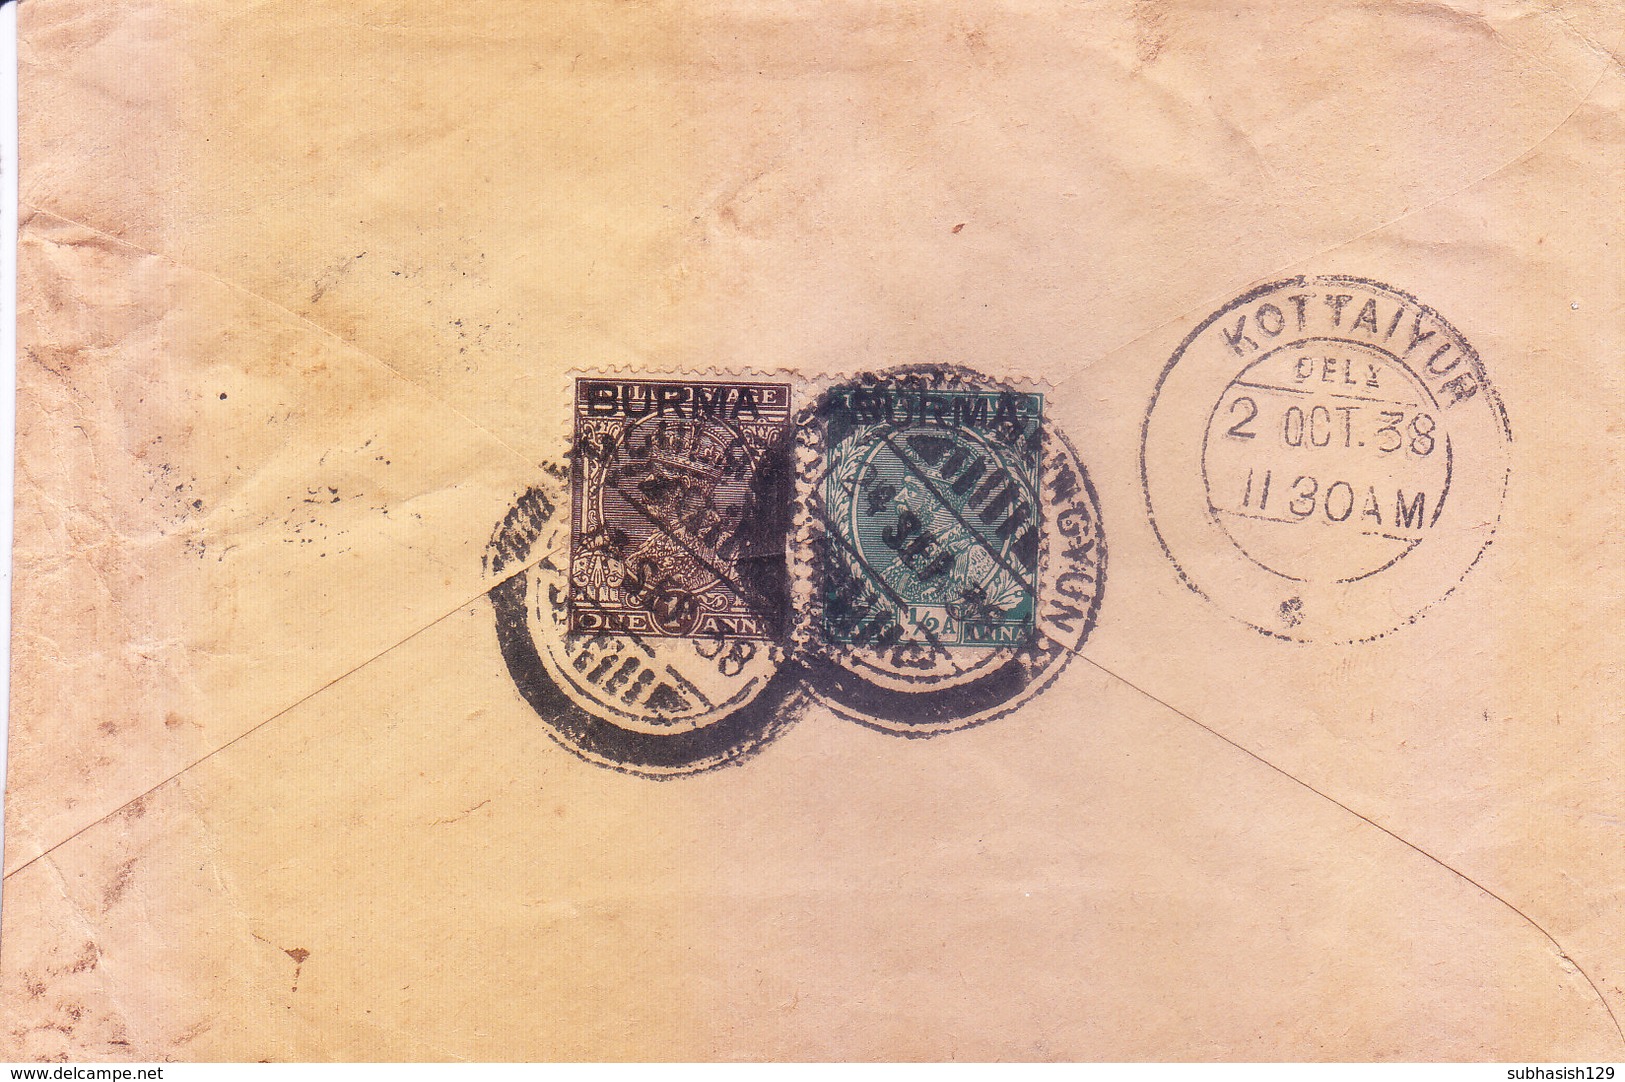 BURMA / MYANMAR - 1938 COMMERCIAL COVER SENT TO KOTTAIYUR WITH BASE CENSOR MARKING, INDIAN GEORGE V STAMPS USED IN BURMA - Birma (...-1947)